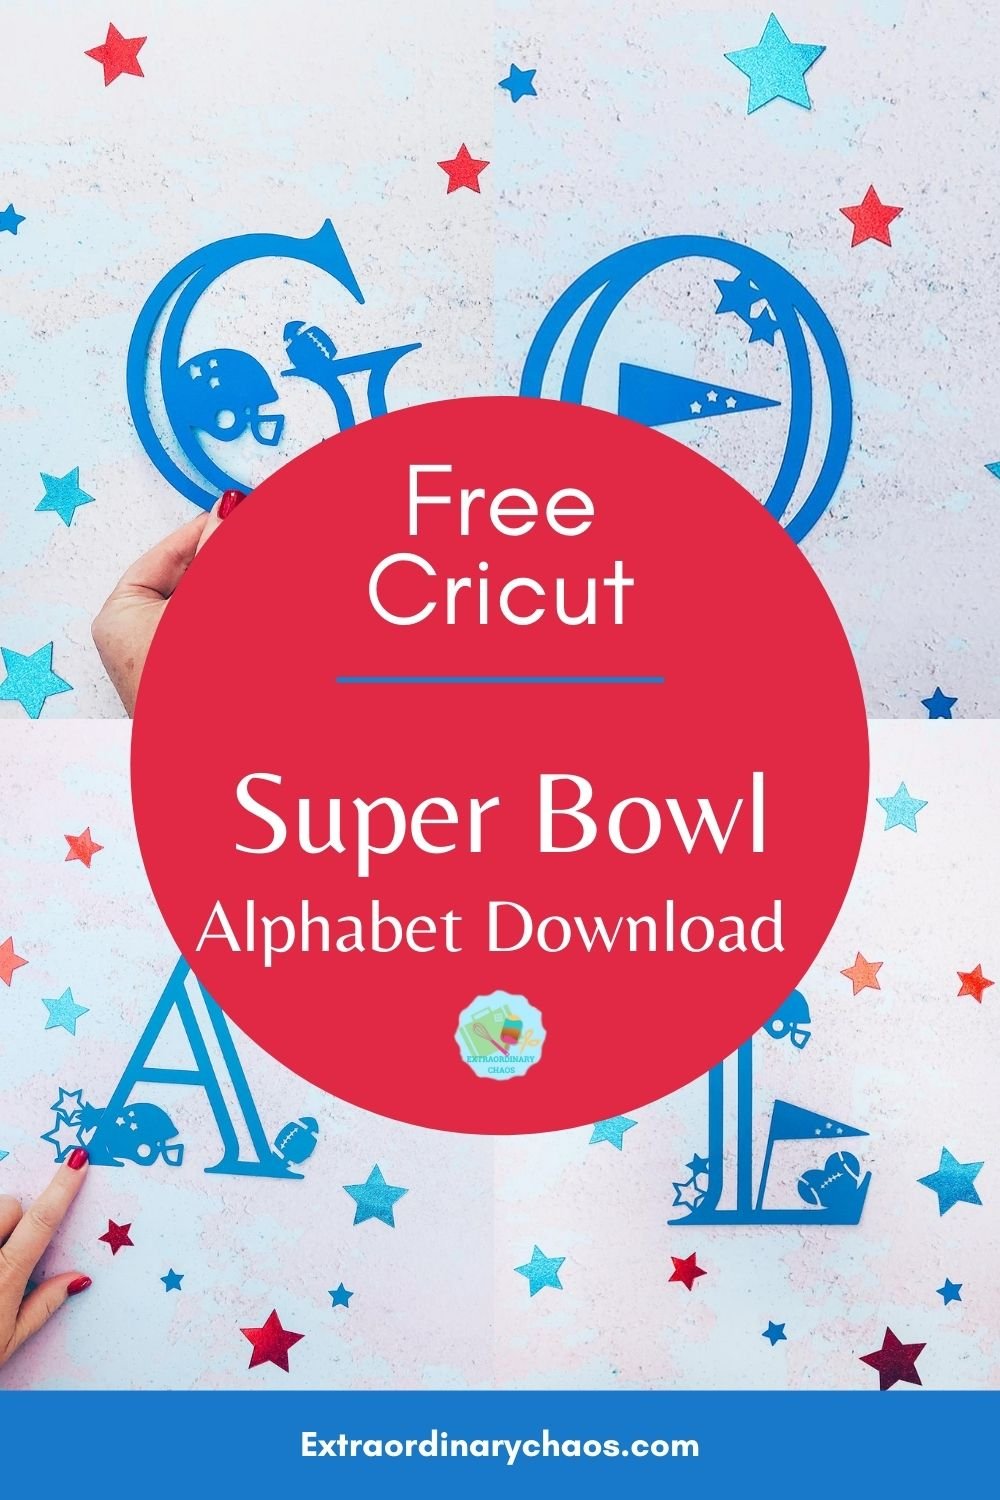 Free downloadable Cricut Super Bowl Alphabet and numbers for Football related Cricut projects